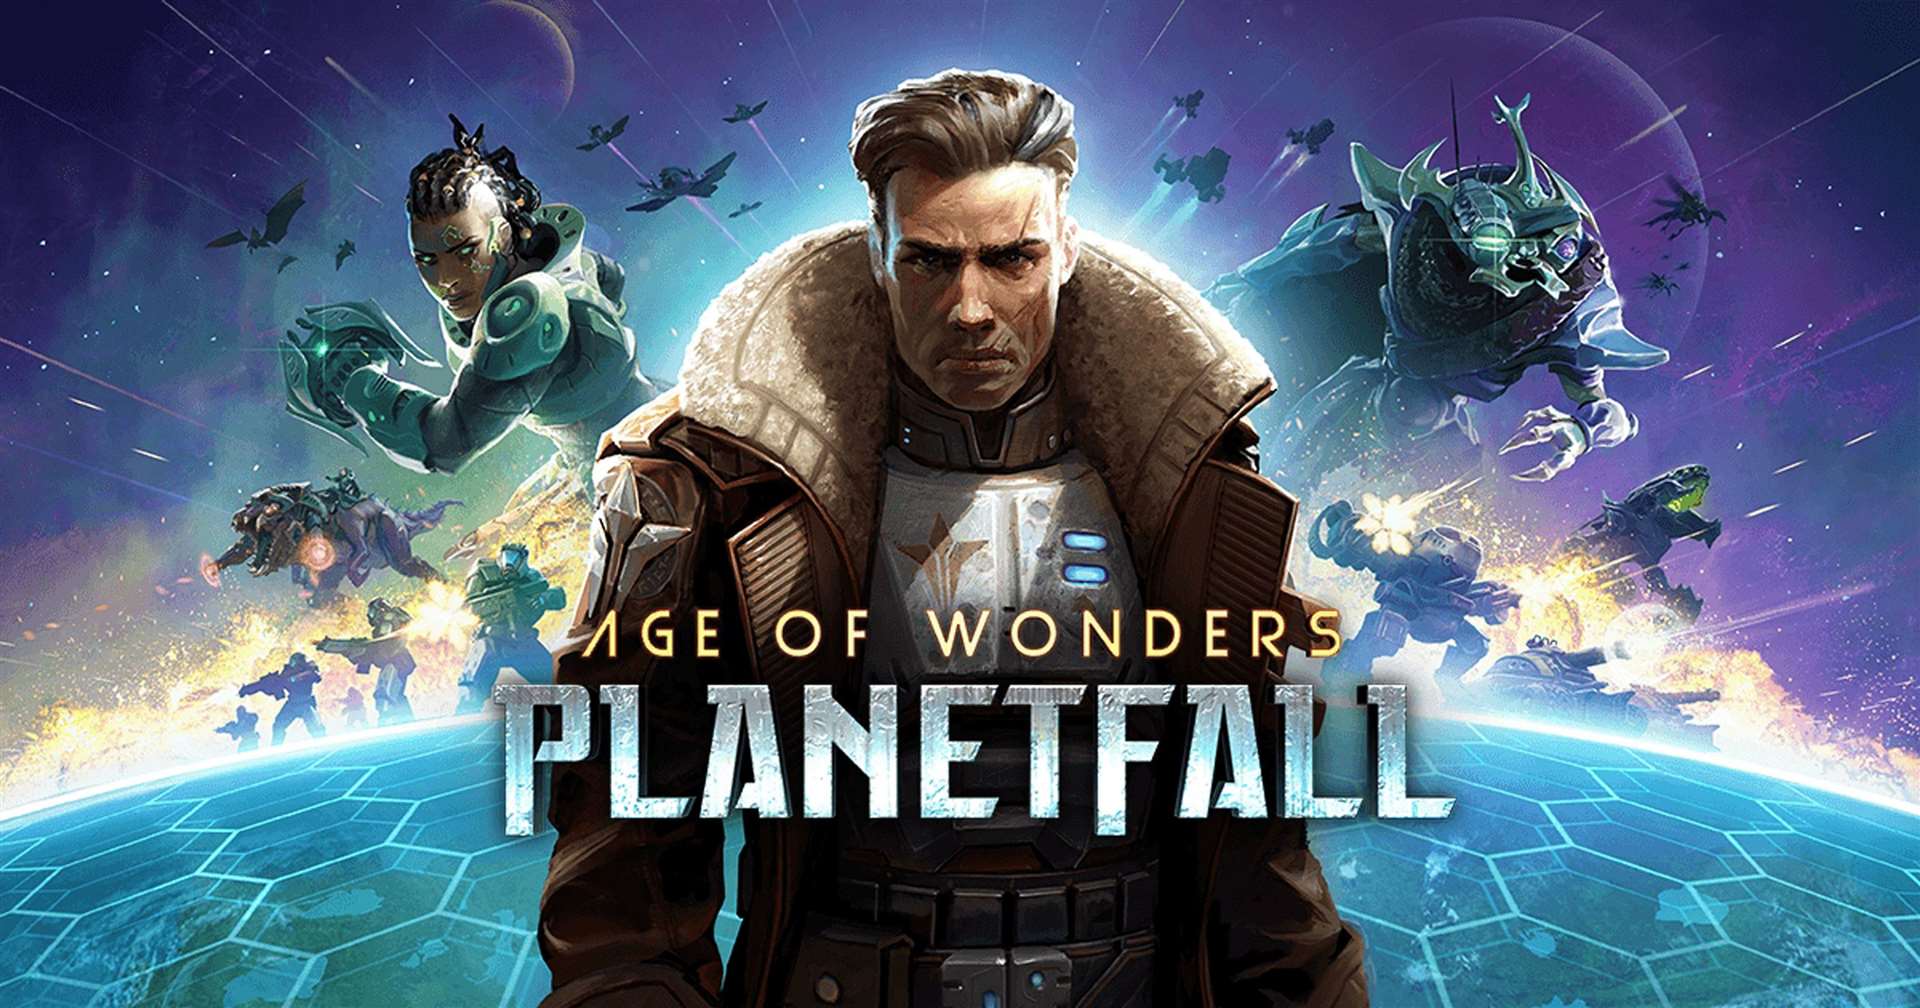 Age of Wonders: Planetfall. Picture: Handout/PA